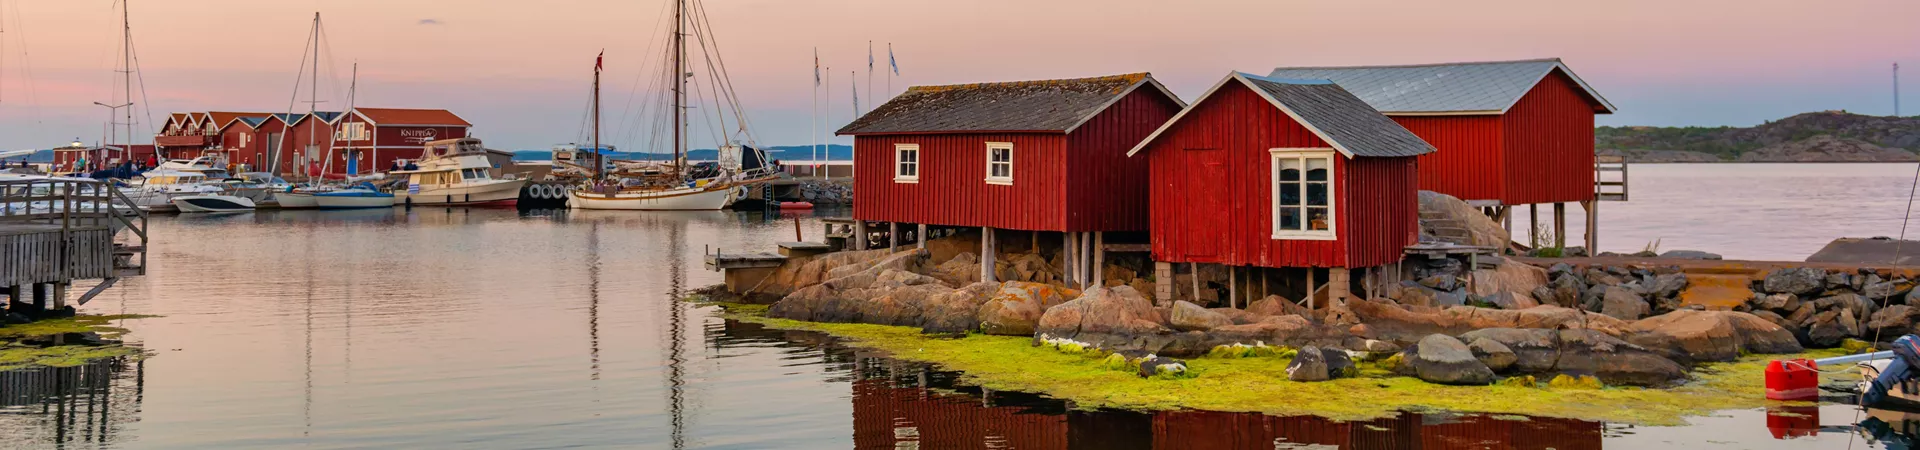 Sweden Luxury Tours and Travel Guide